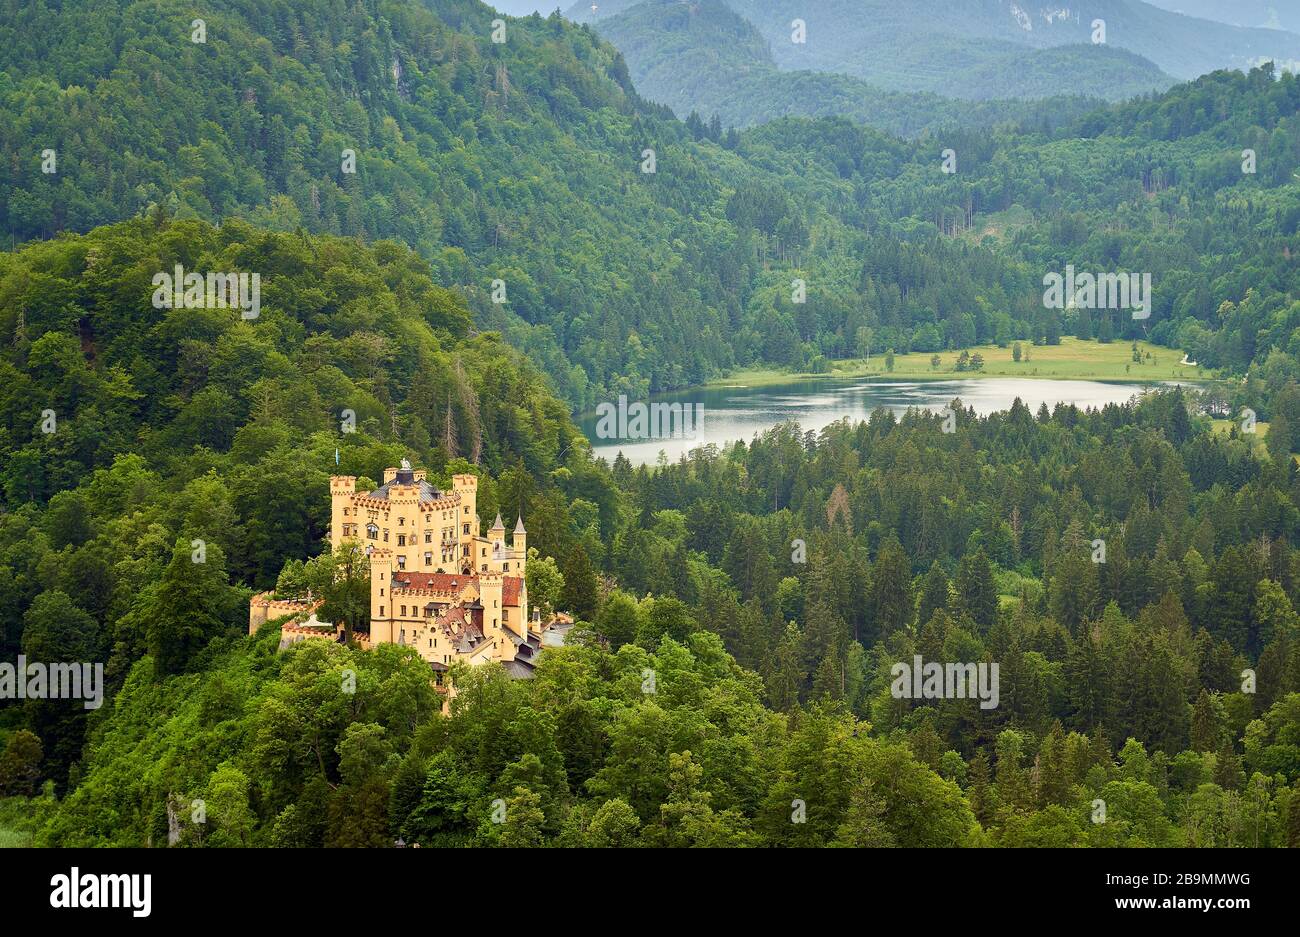 A view of a Hoehenschwangau castle surrounded by forest and a Swan lake in the background. Stock Photo